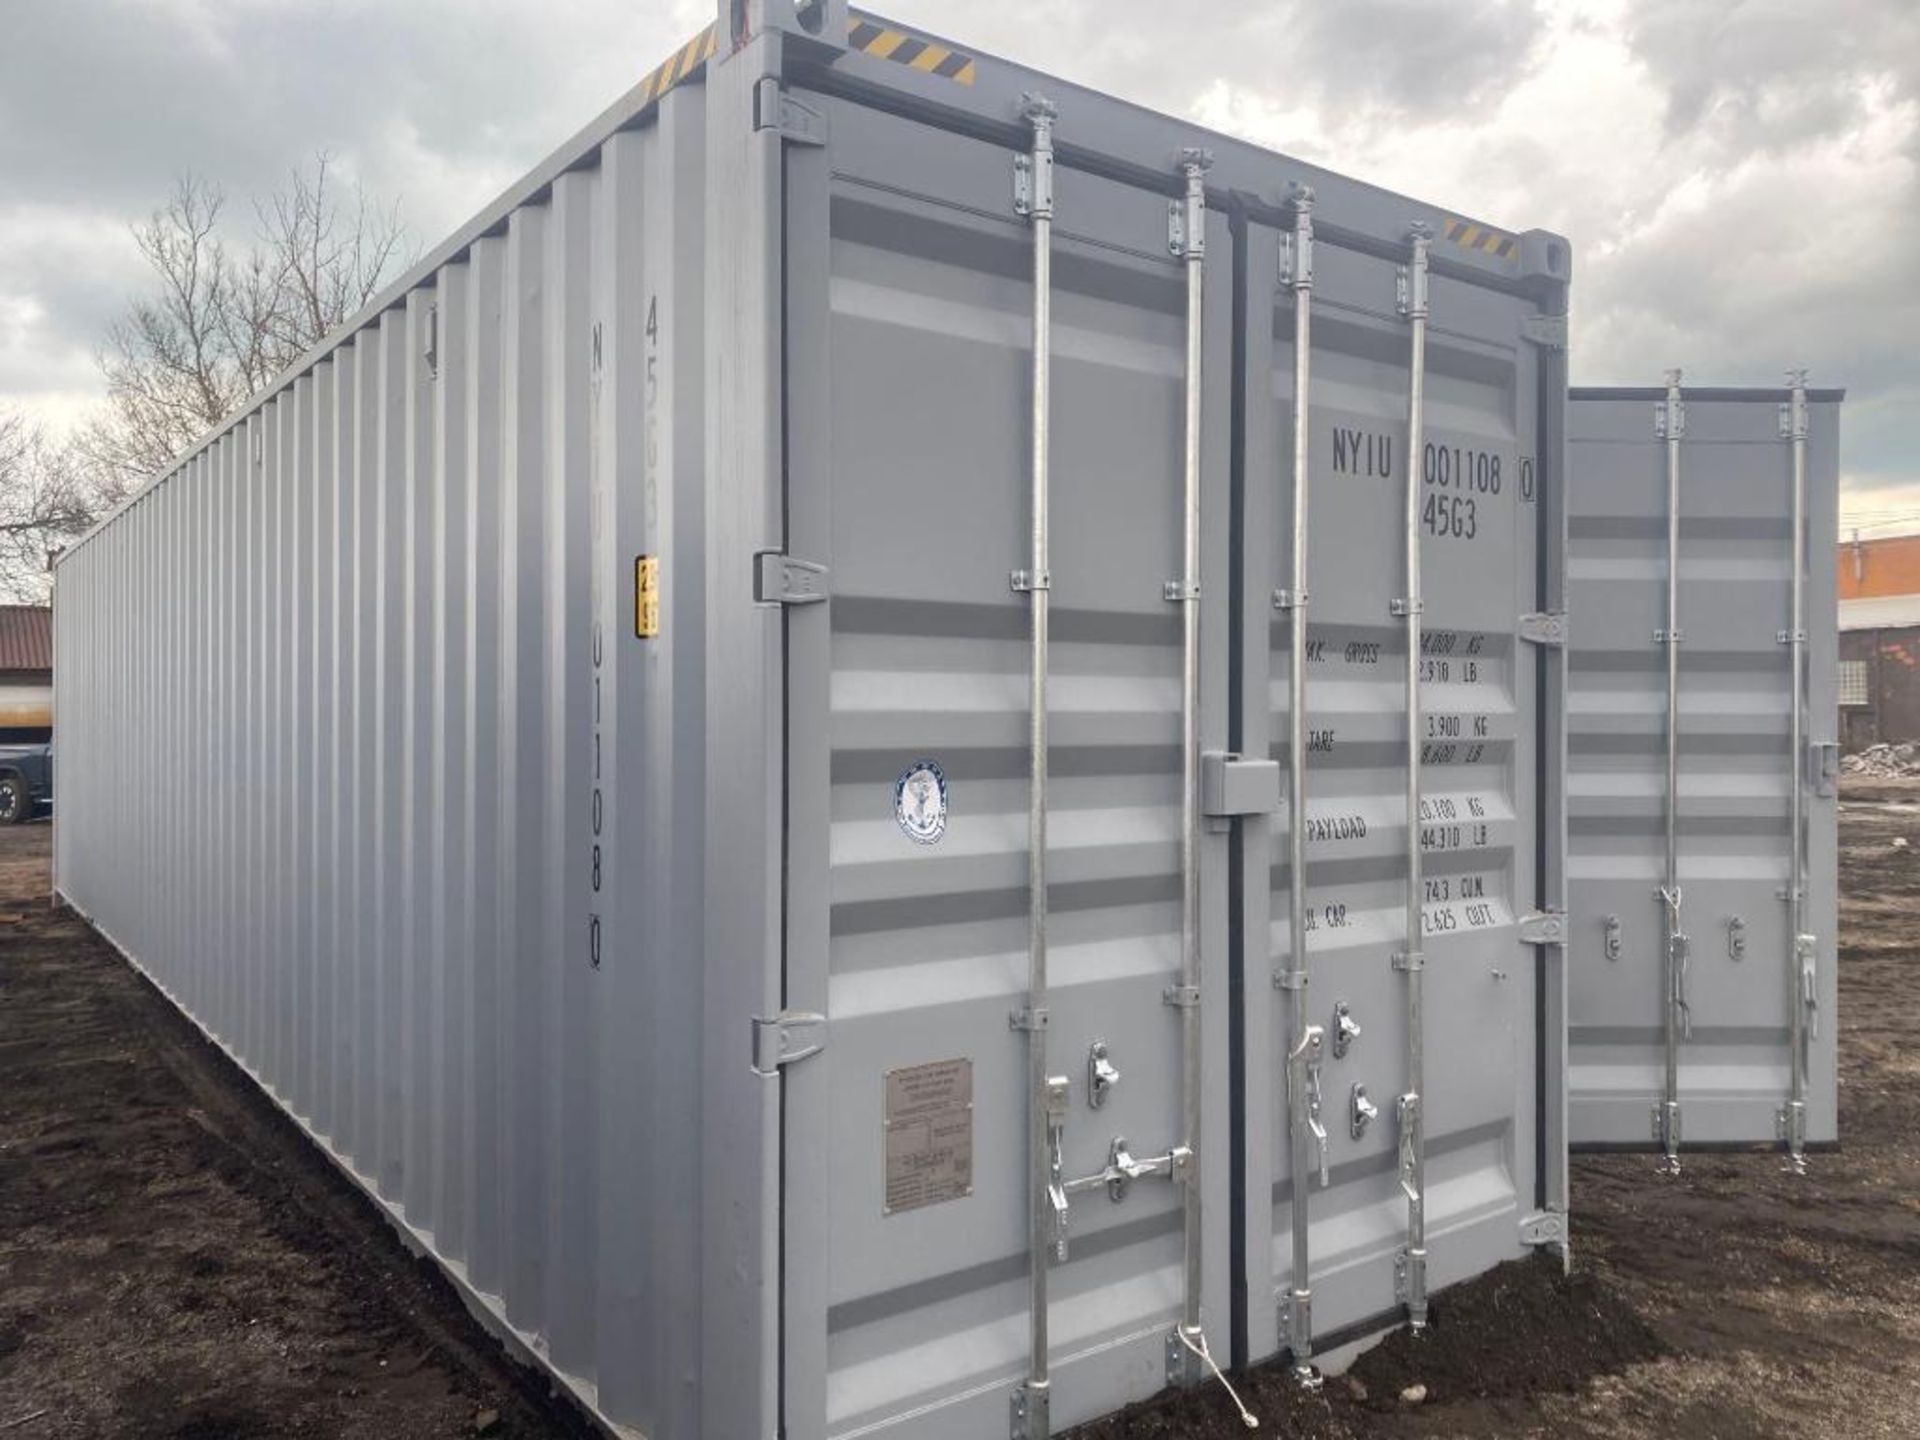 New NYIU 40ft (2 Side Door) Steel Shipping/Storage Container - Image 5 of 5